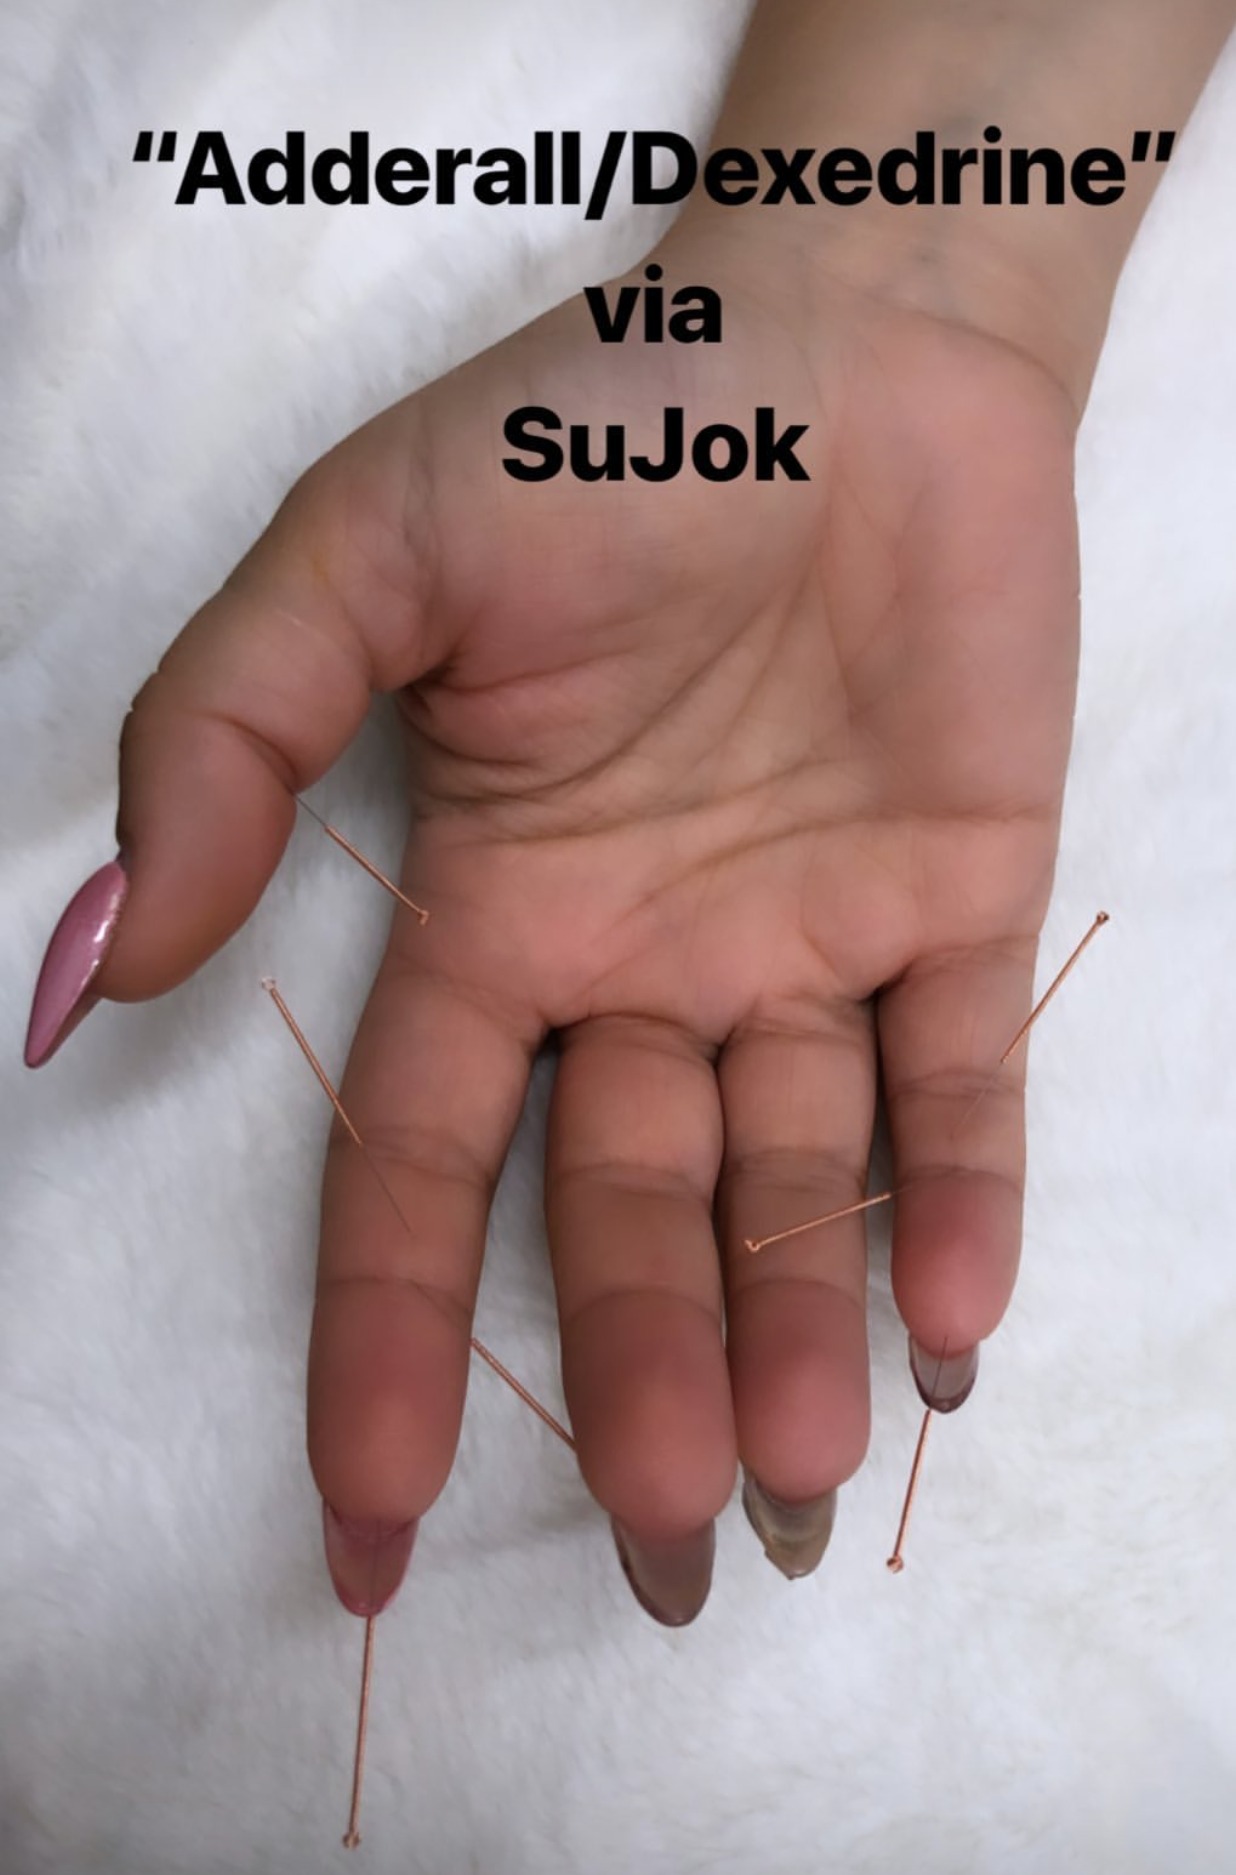  Using Sujok acupuncture treatment used for career and personal life as an alternative to traditional western medicine and diagnosis.  